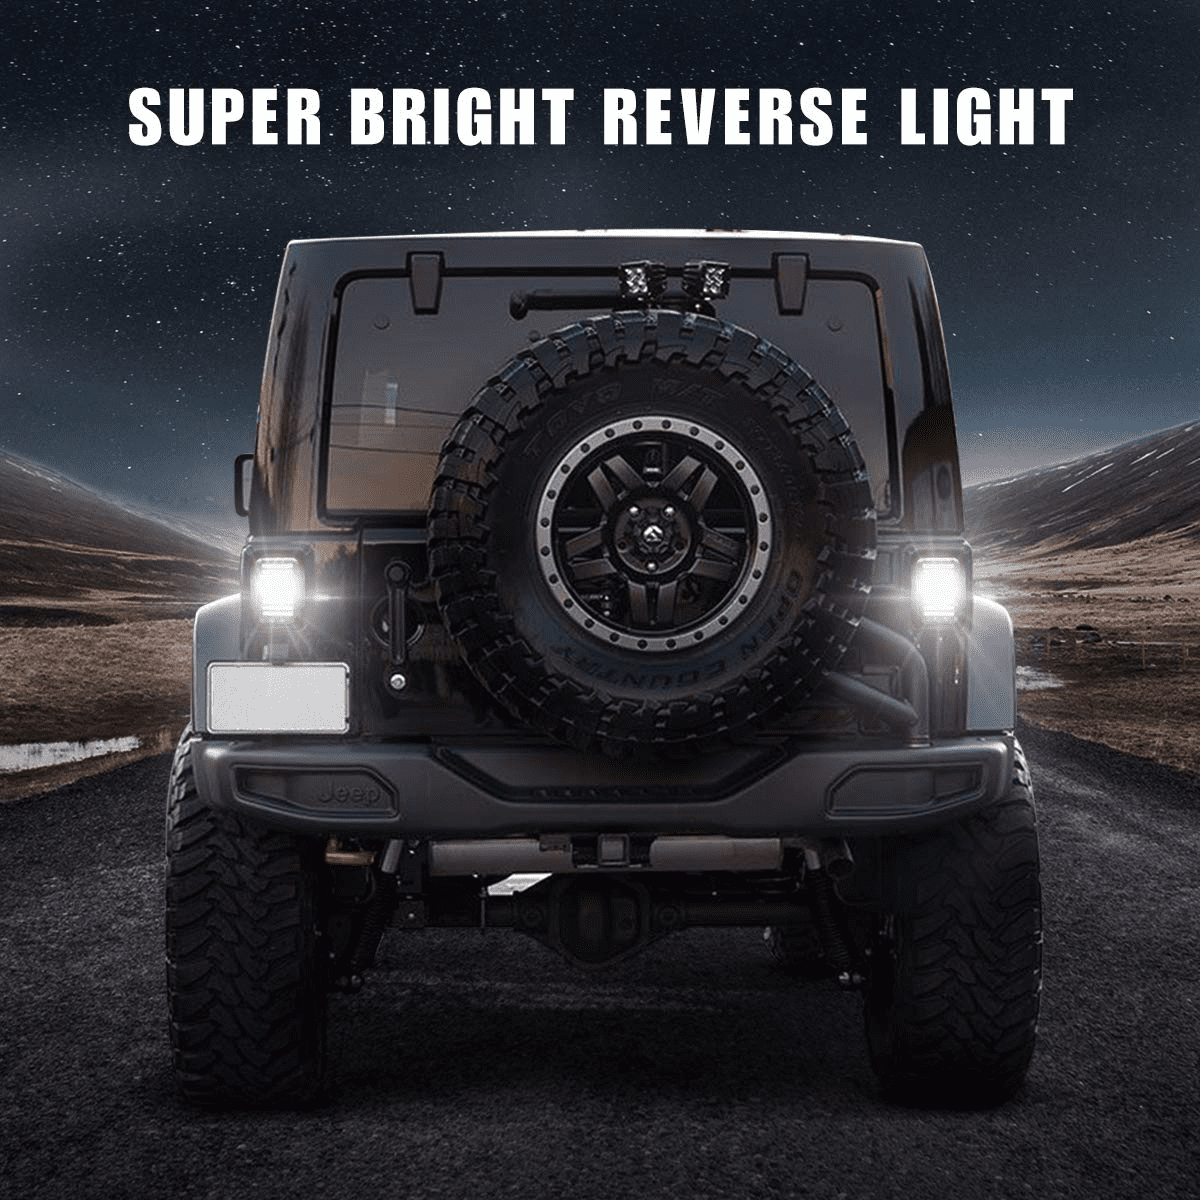 Somked Lens LED Tail Lights DOT Approved Compatible with Jeep Wrangler JK JKU 2007-2018 Built in EMC with 20W Reverse Light 